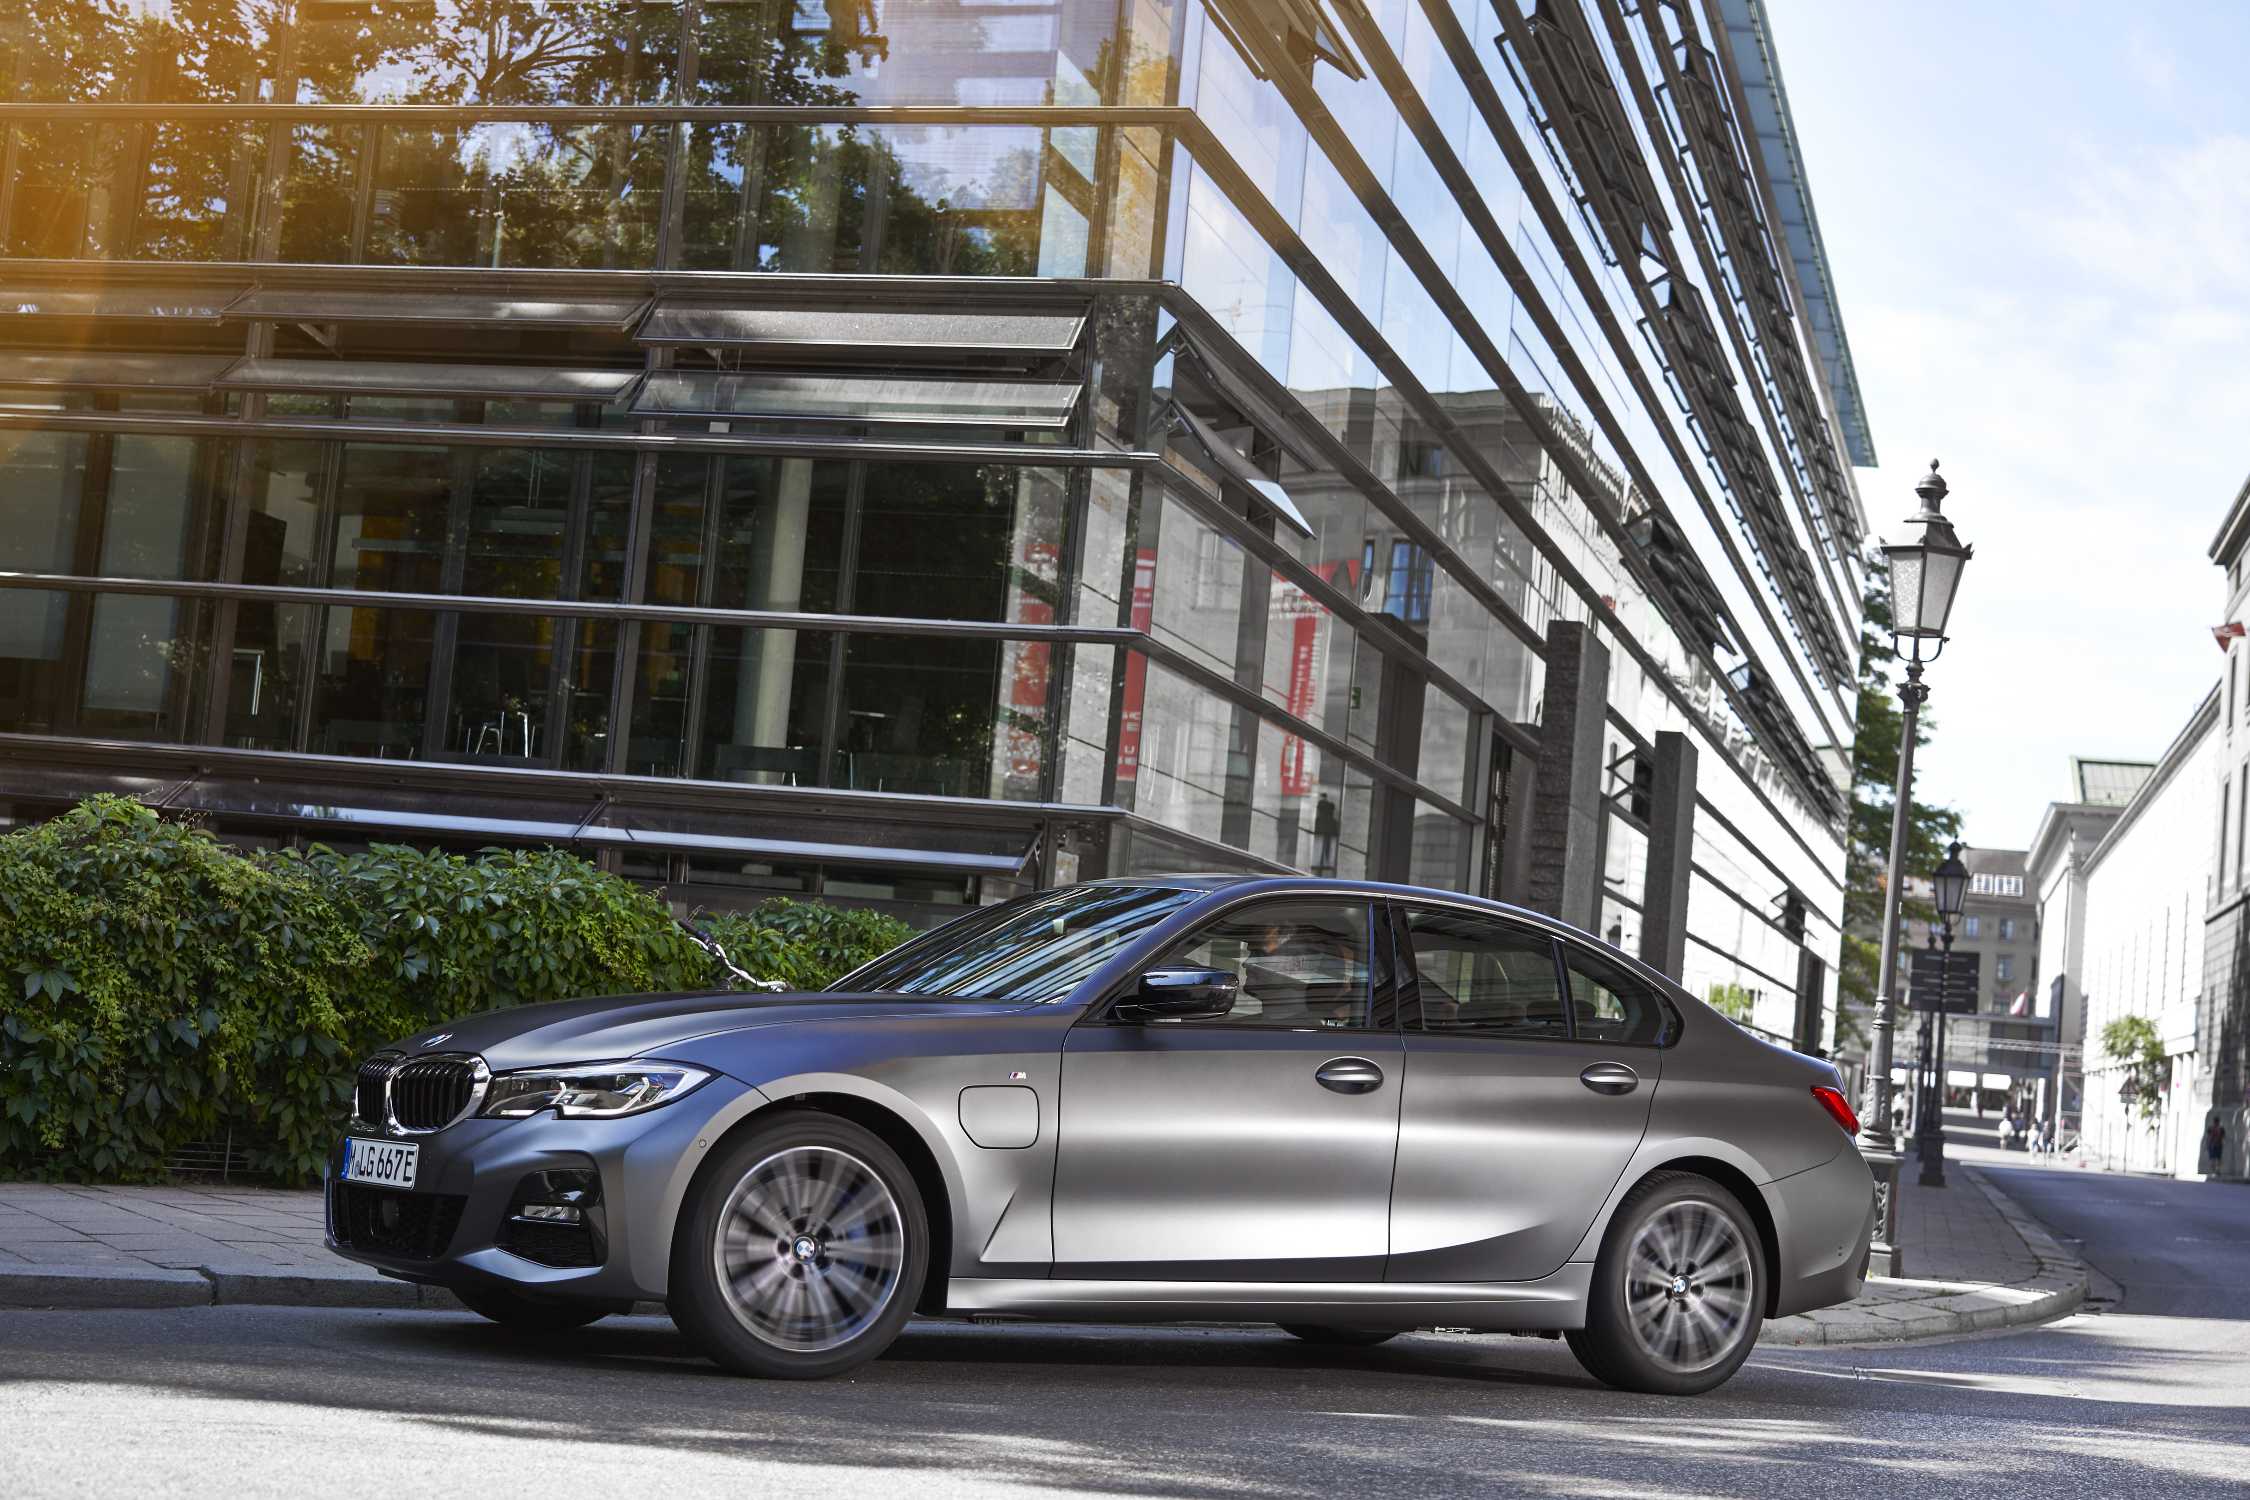 Kerstmis Trouwens Pence New entry-level models with plug-in hybrid drive for the BMW 3 Series and  BMW 5 Series.